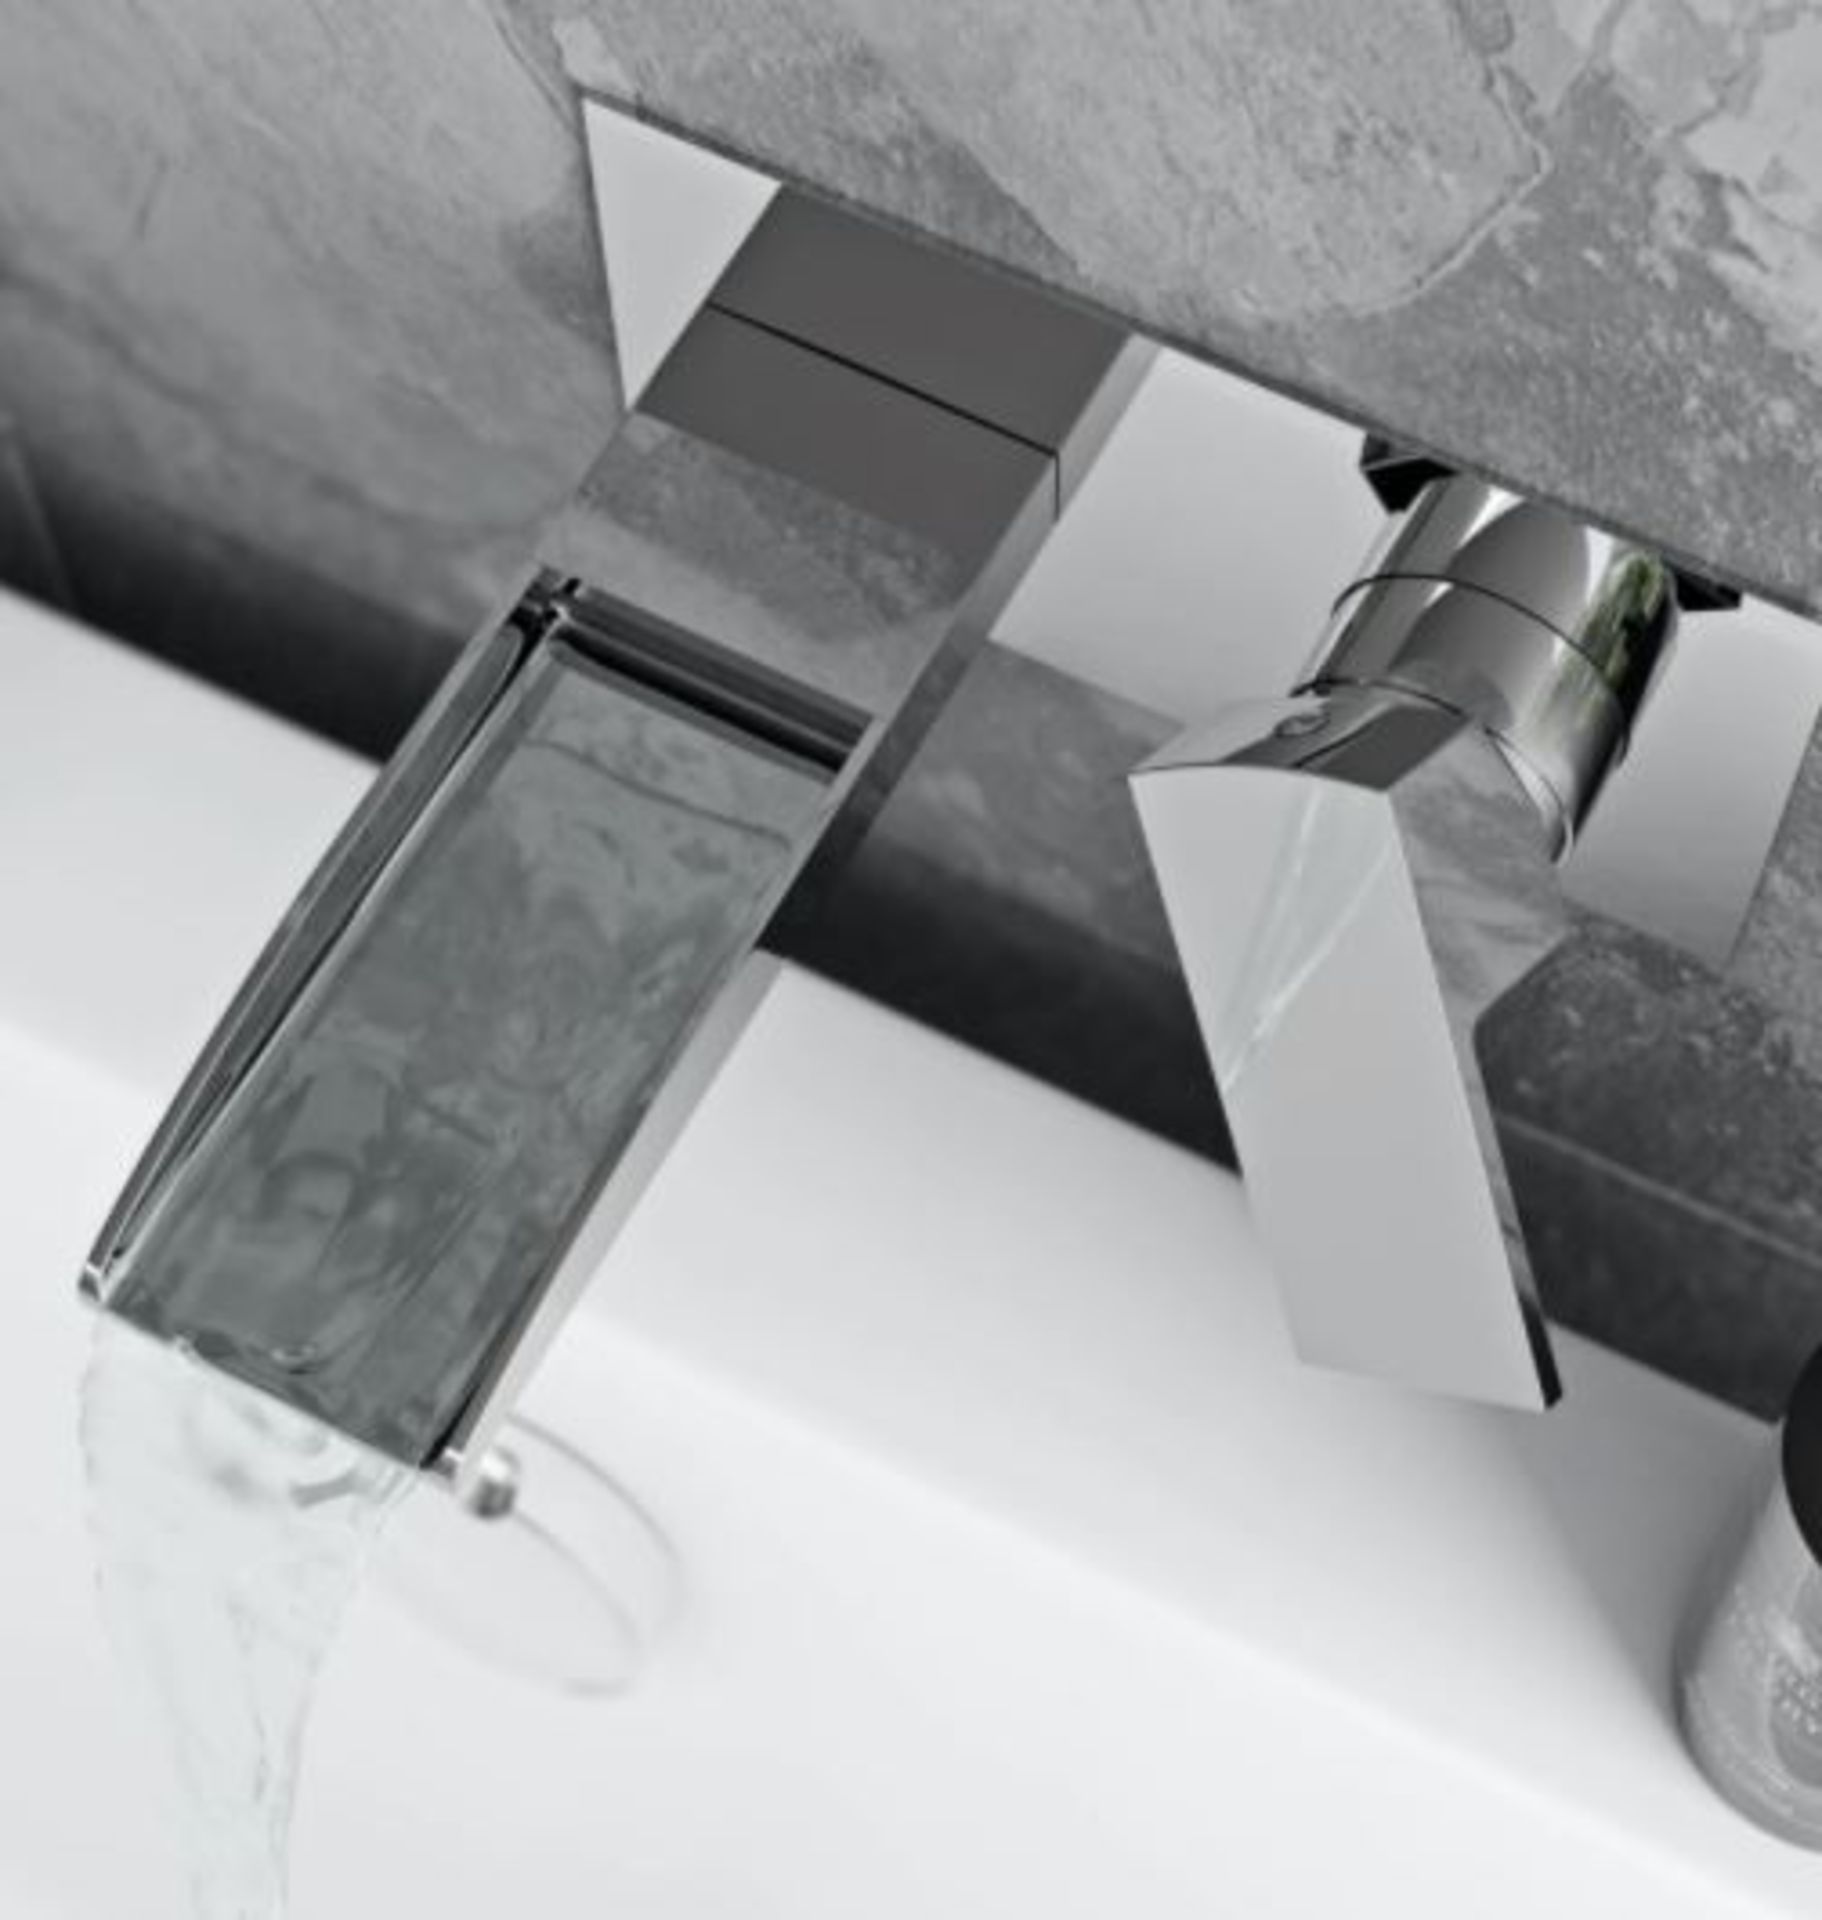 Mode Wall Mounted Square Bath Mixer Tap Brushed Nickel Finish - Image 3 of 5